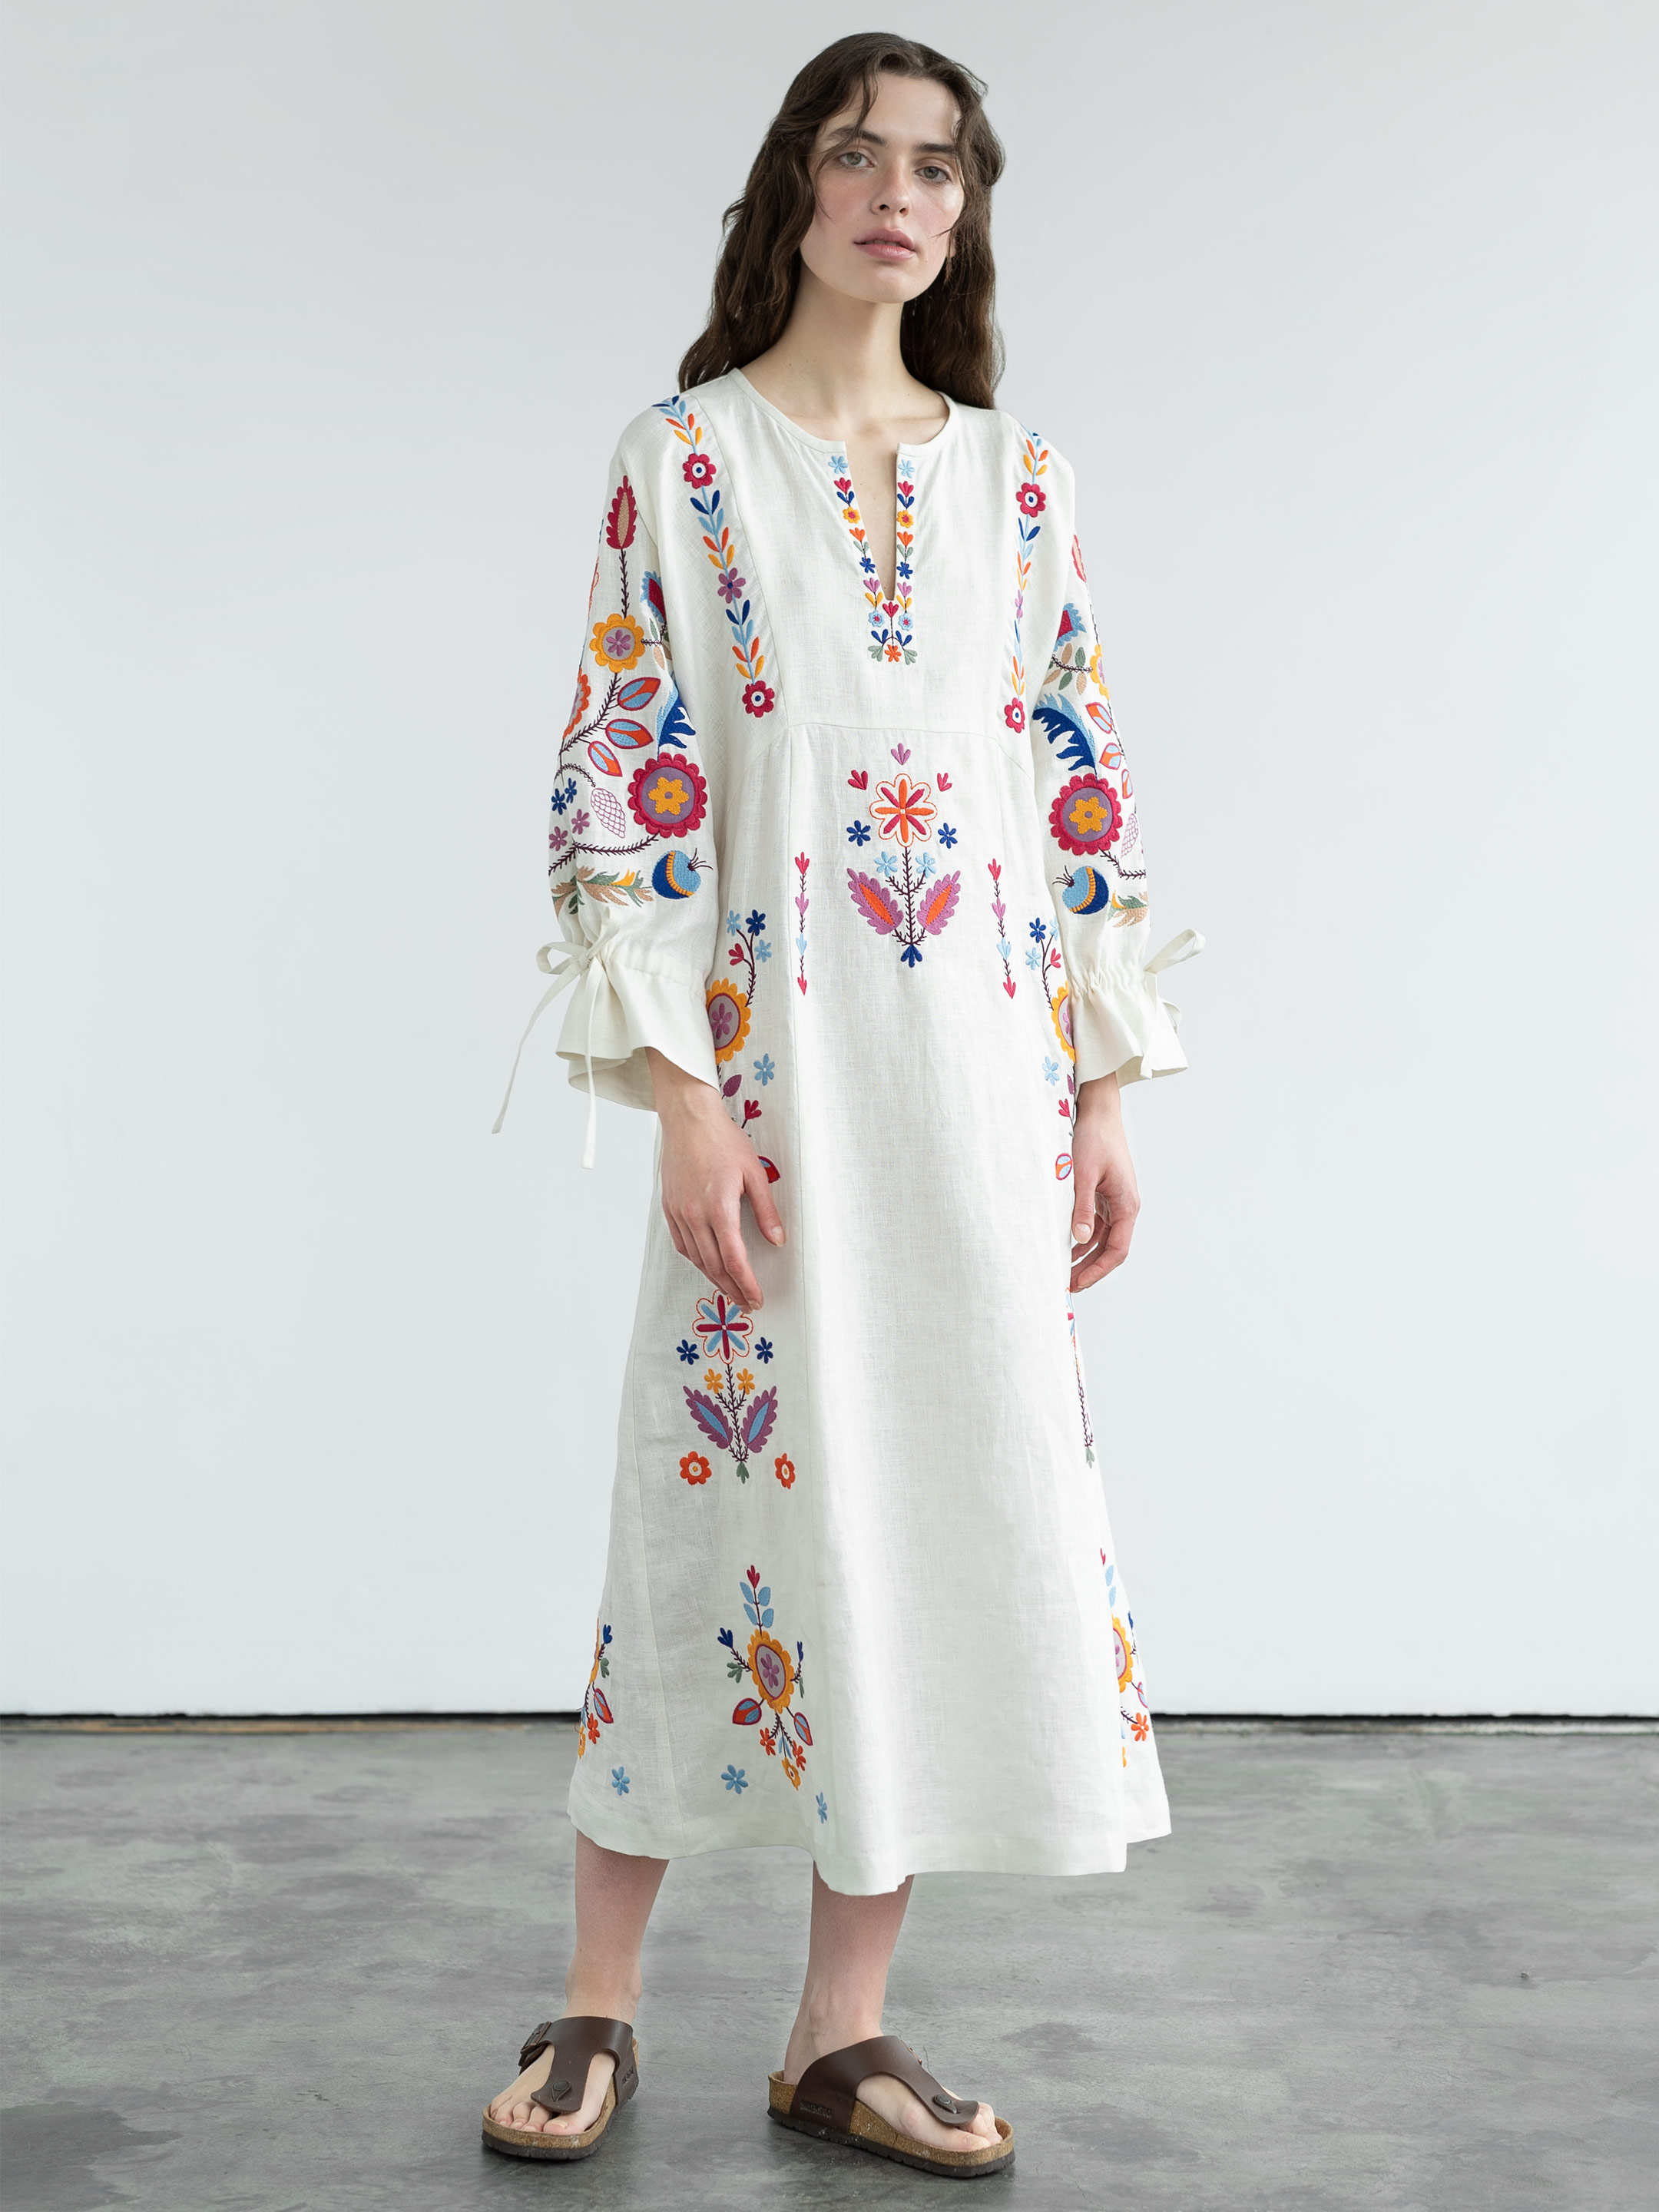 35 Best floral embroidery dress ideas